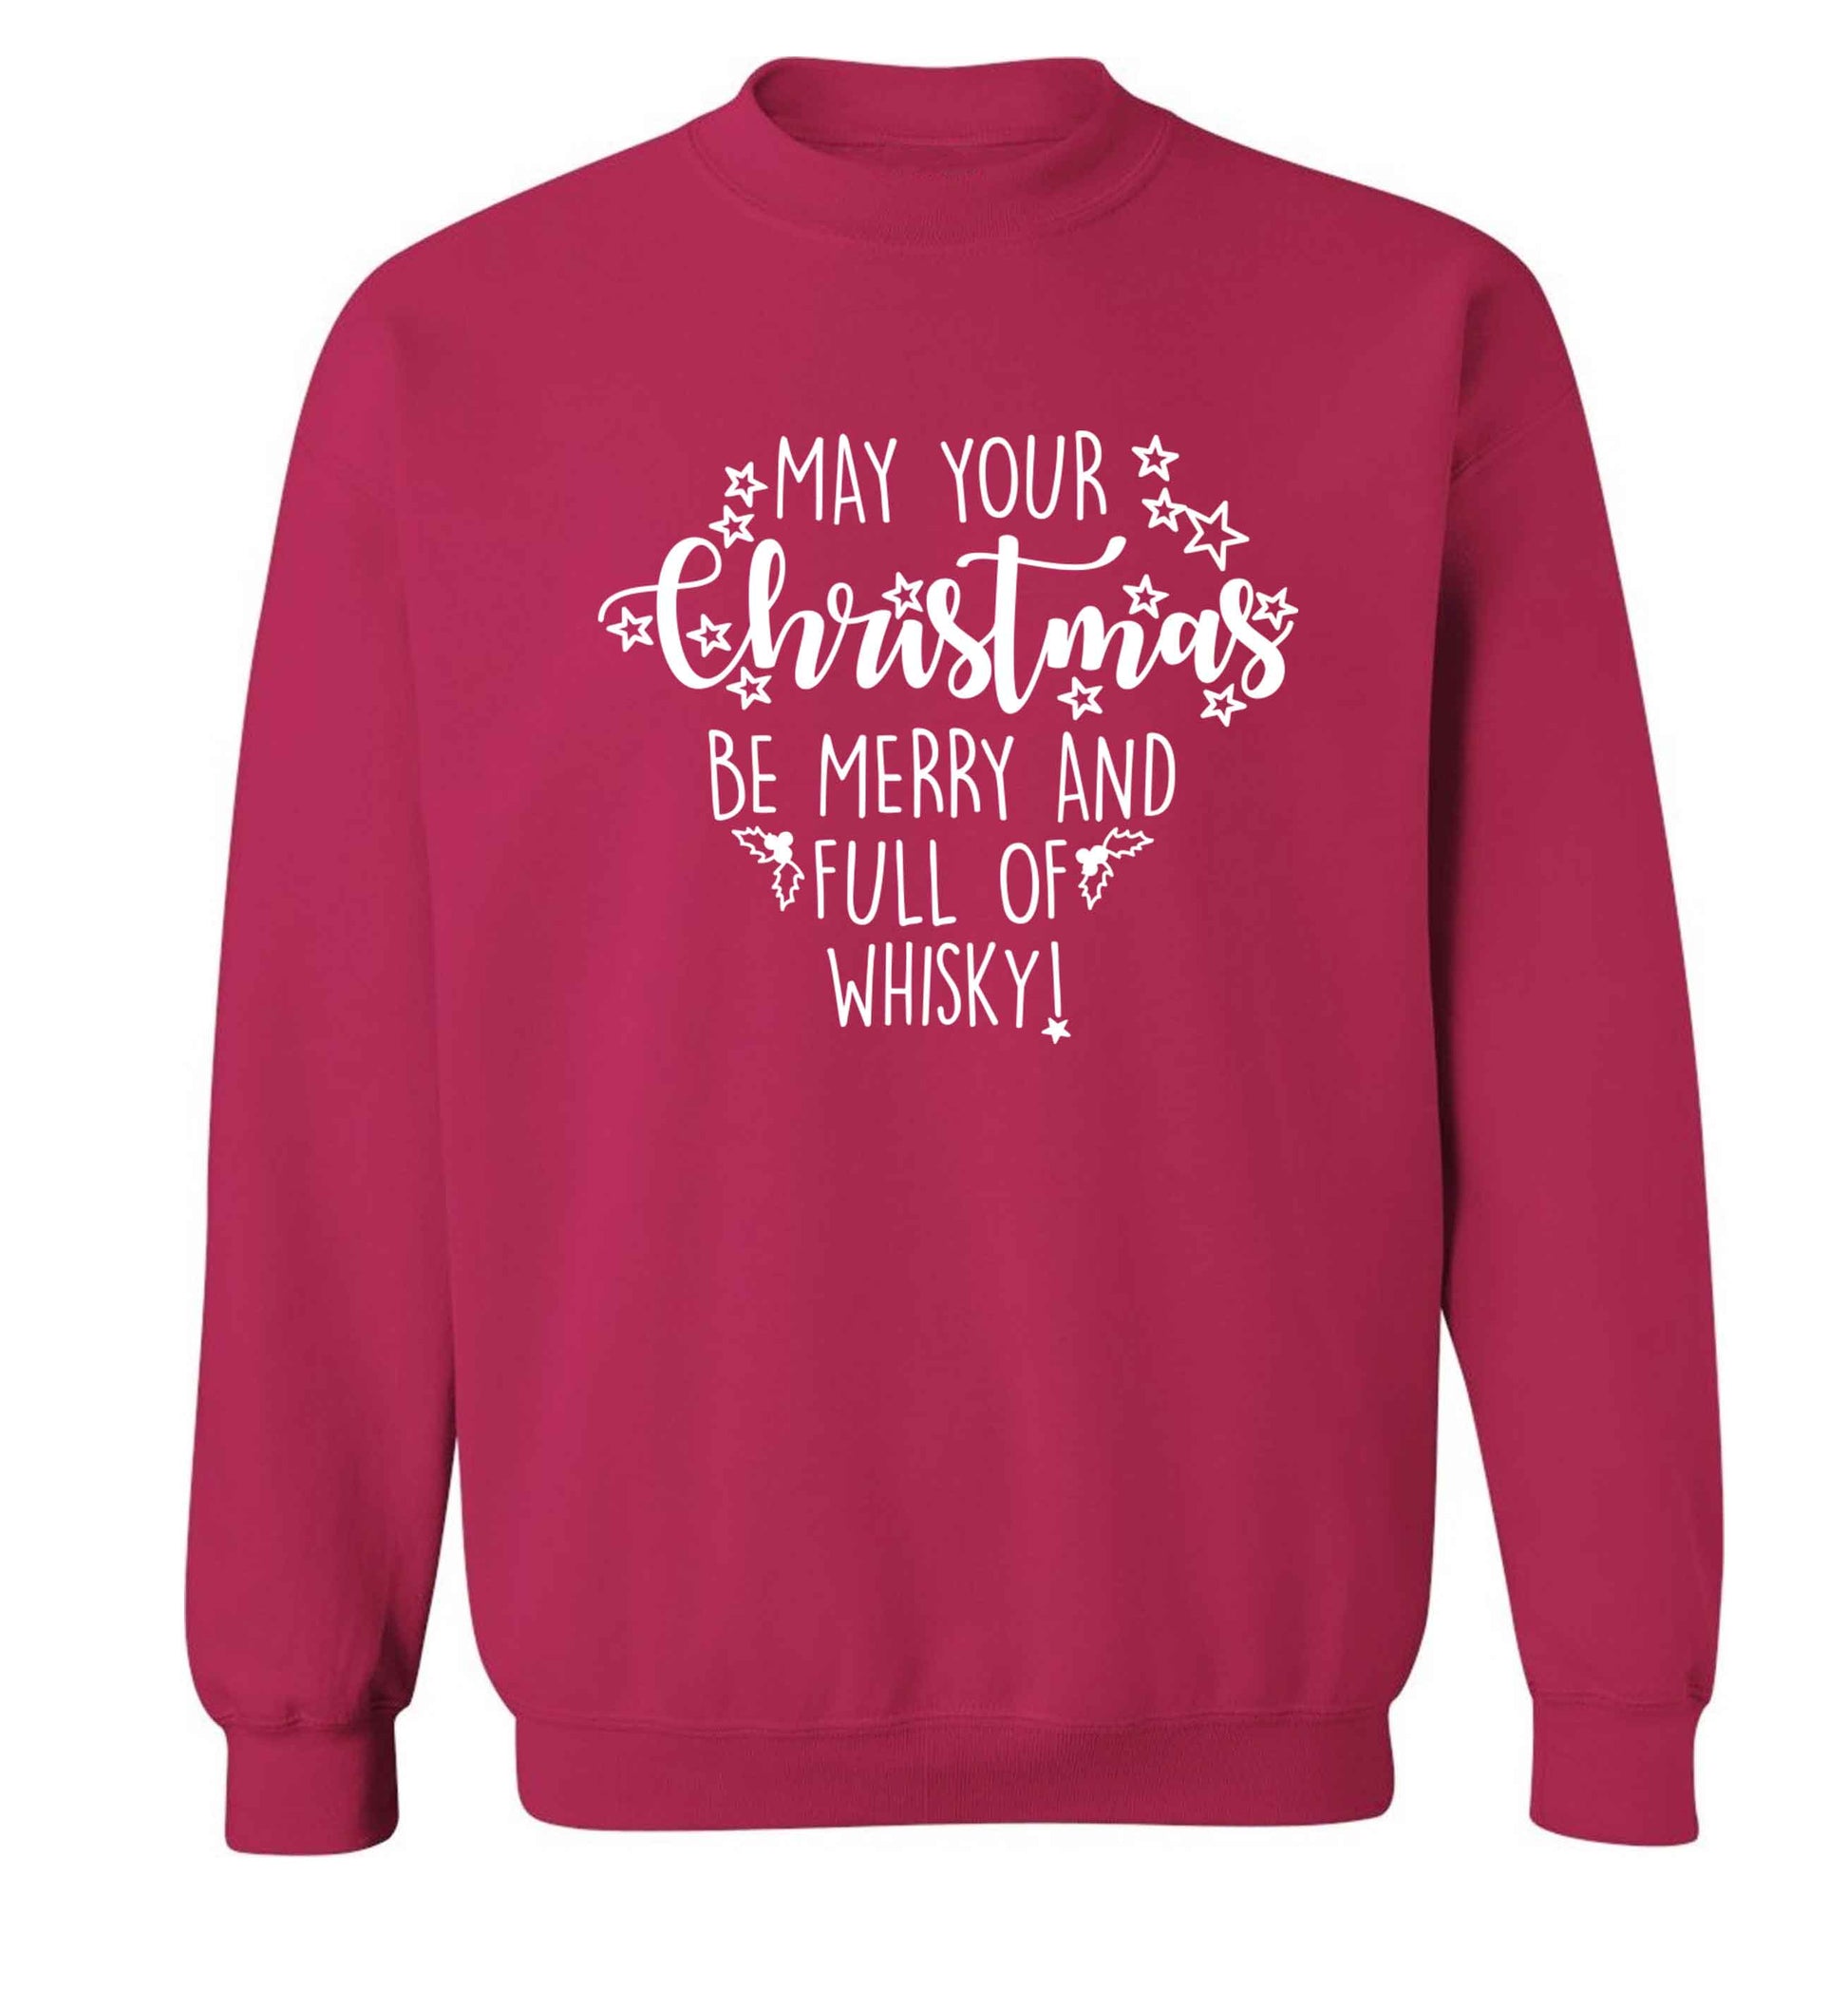 May your Christmas be merry and full of whisky Adult's unisex pink Sweater 2XL